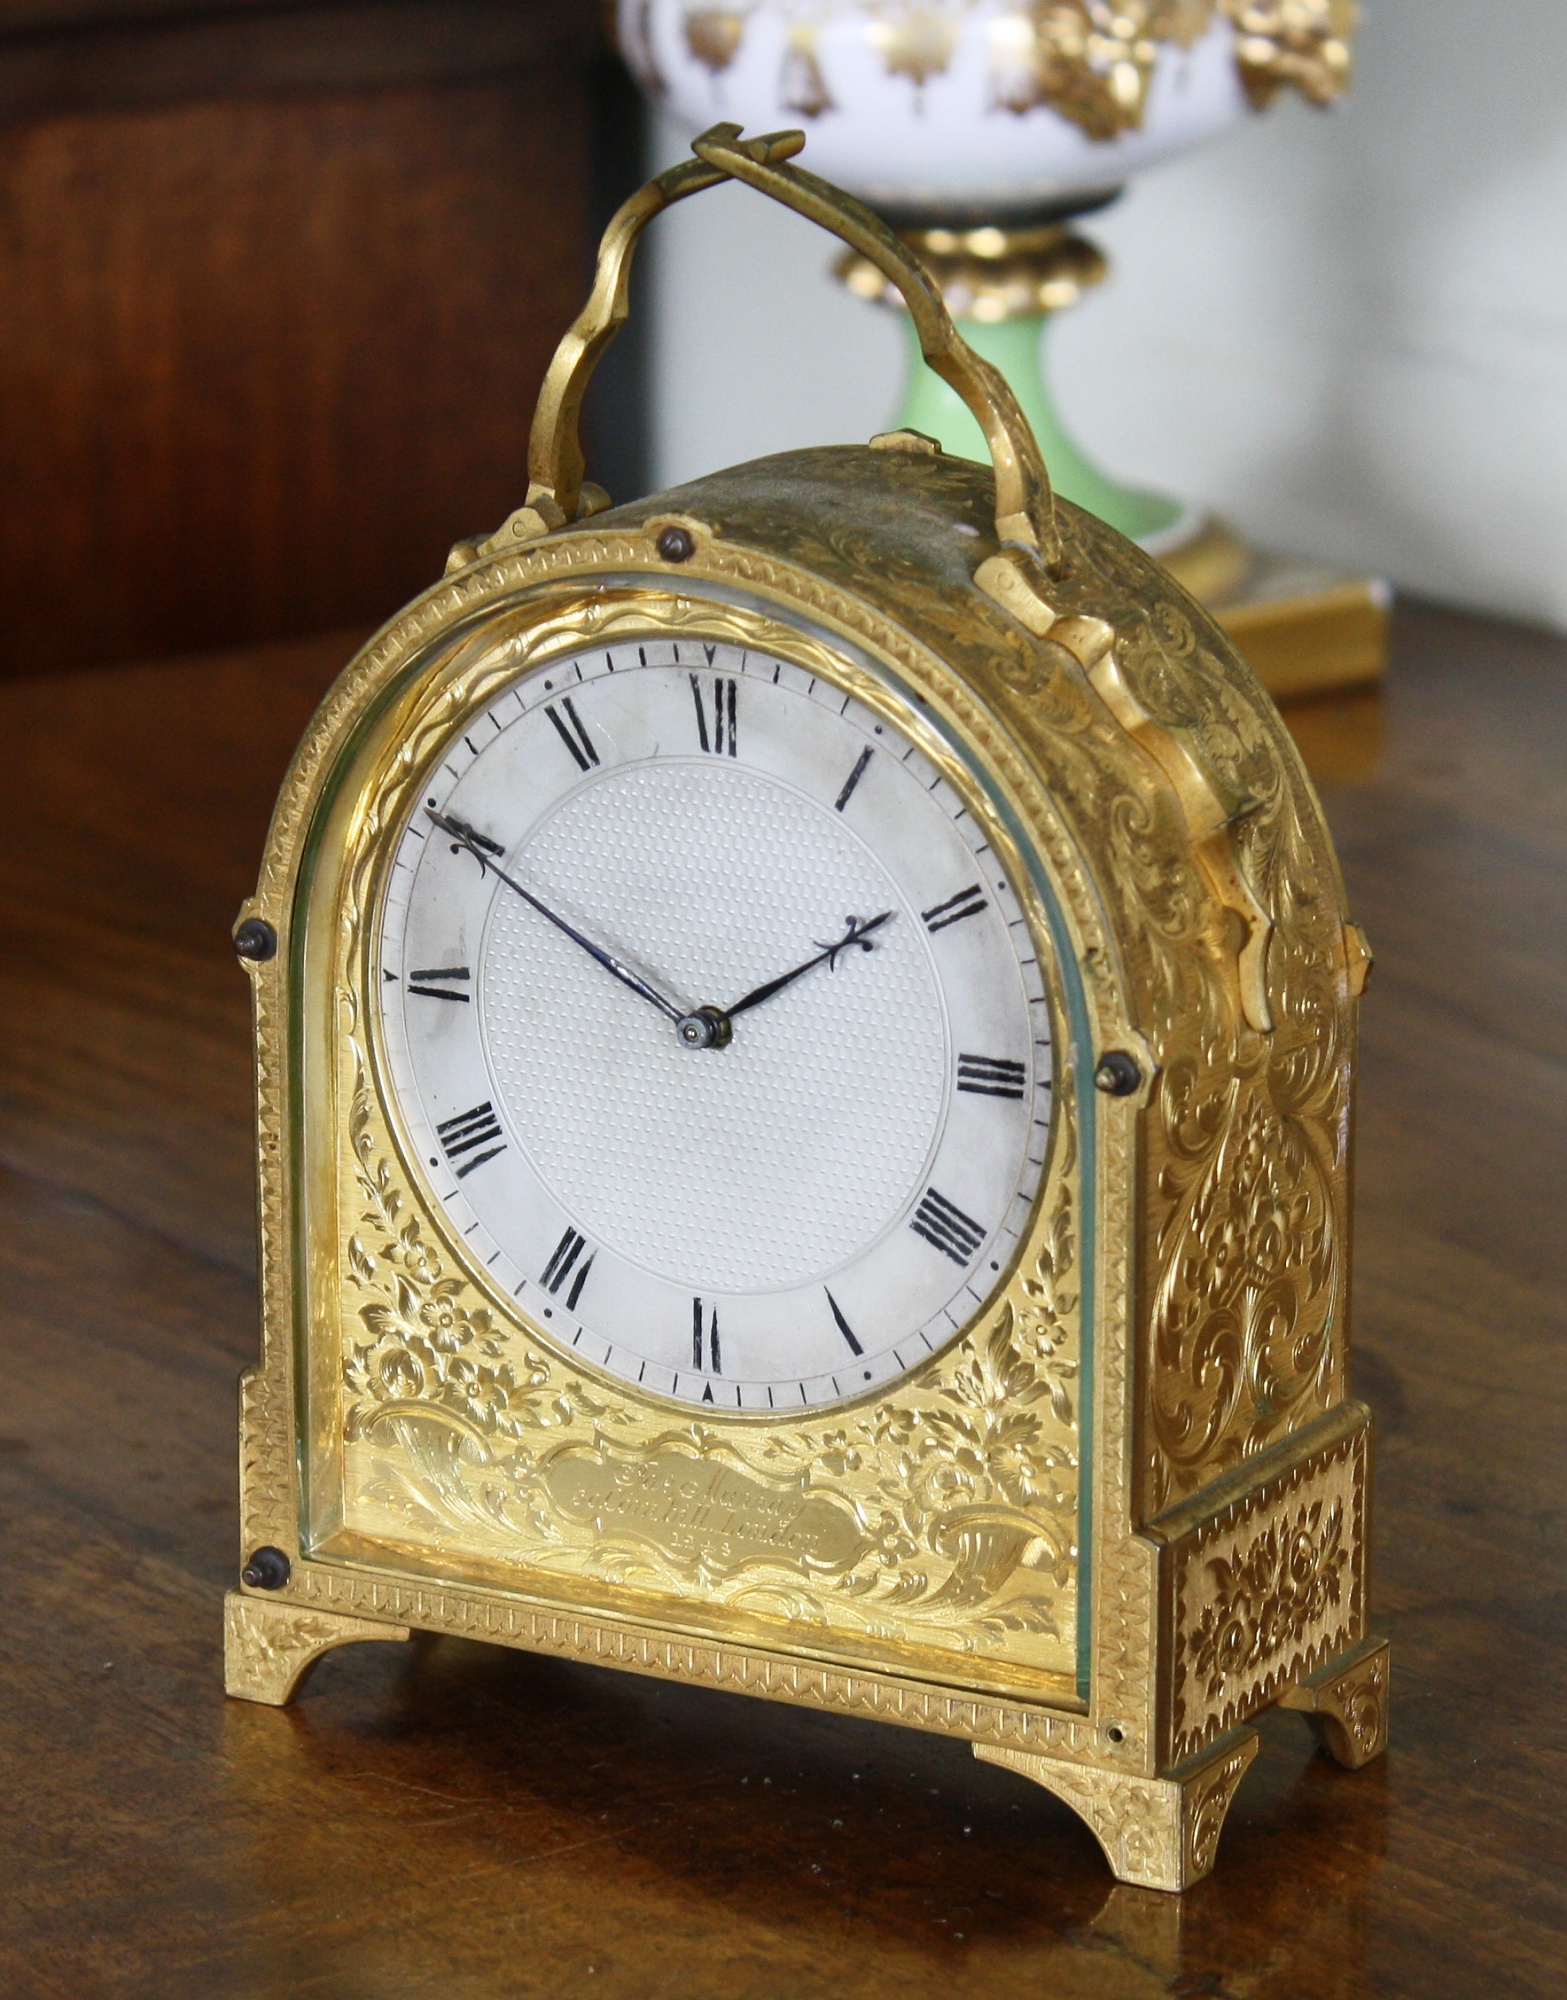 A fine and rare early Victorian engraved gilt brass hump-back carriage clock by James Murray of - Image 7 of 7